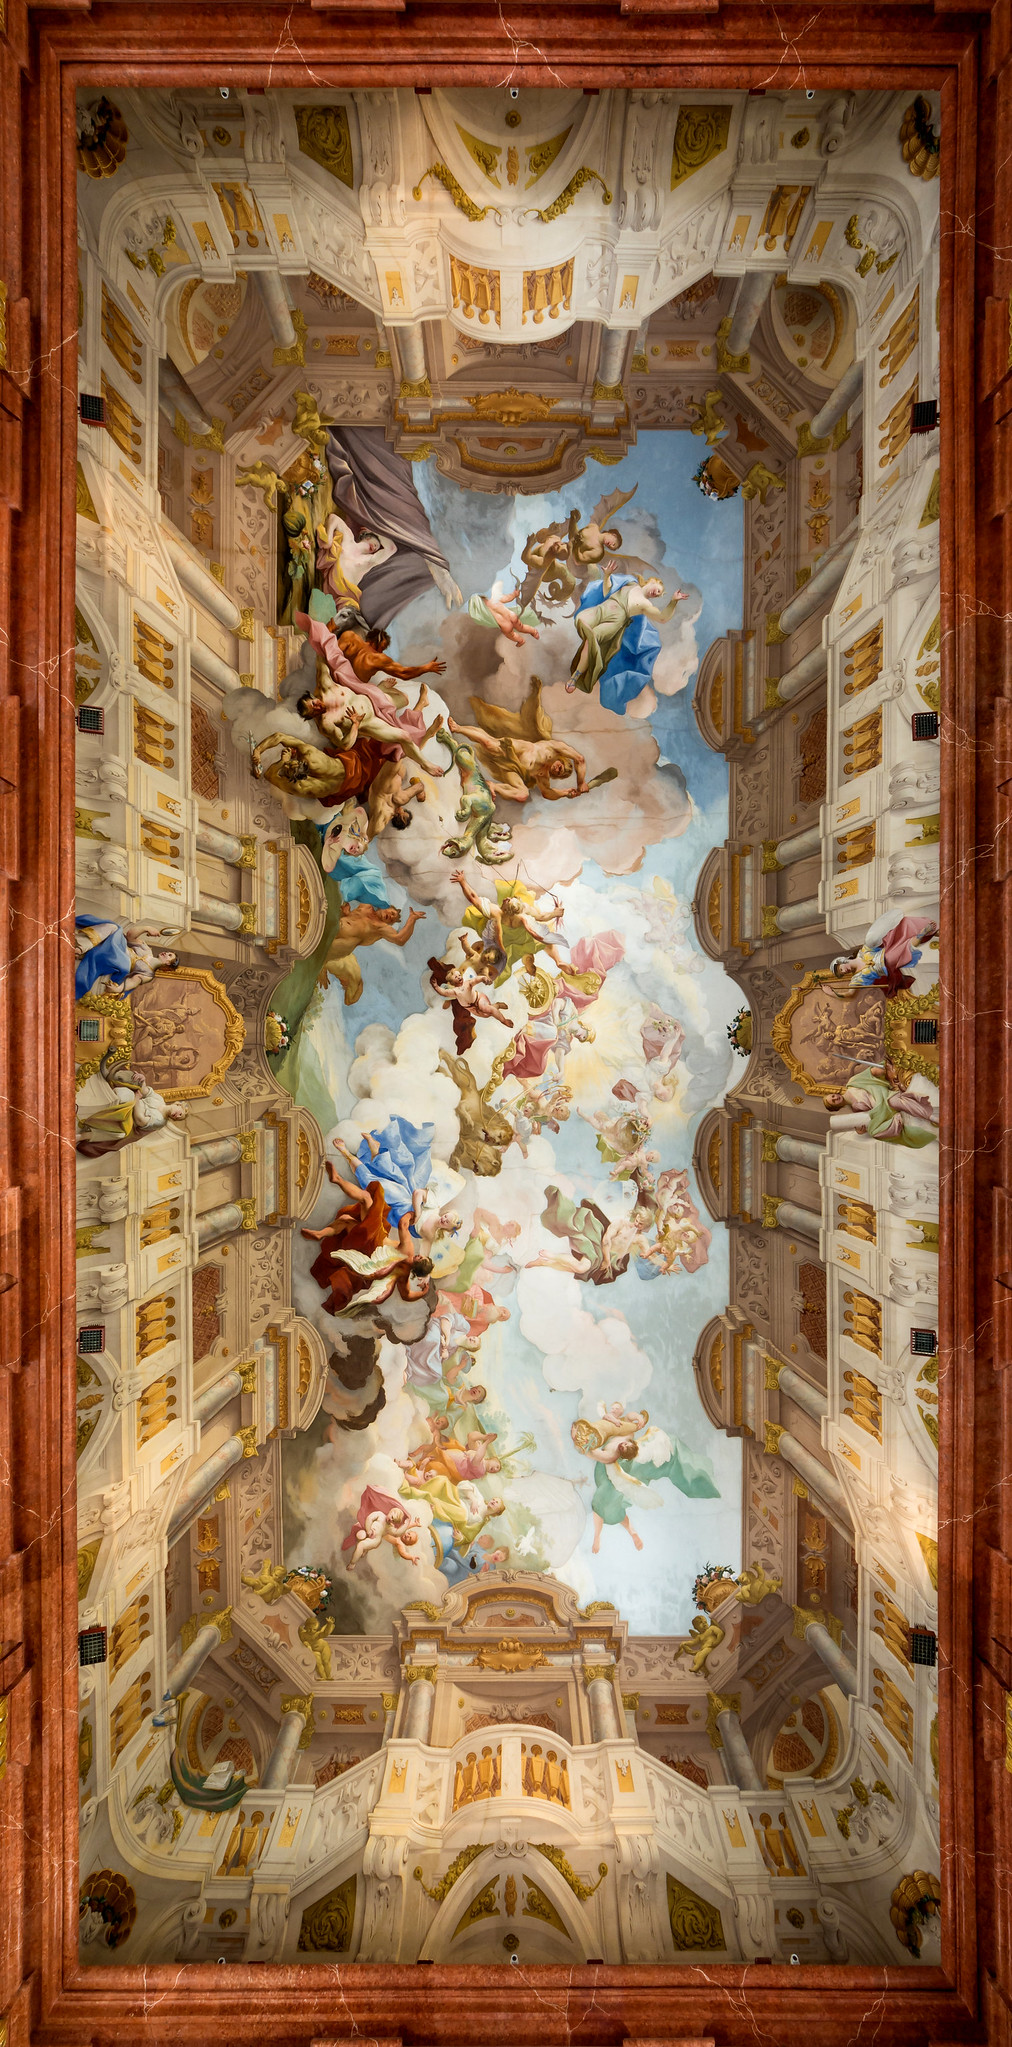 Ceiling fresco in the Marble Hall of Melk Abbey by Paul Troger, 1730. Credit Uoaei1